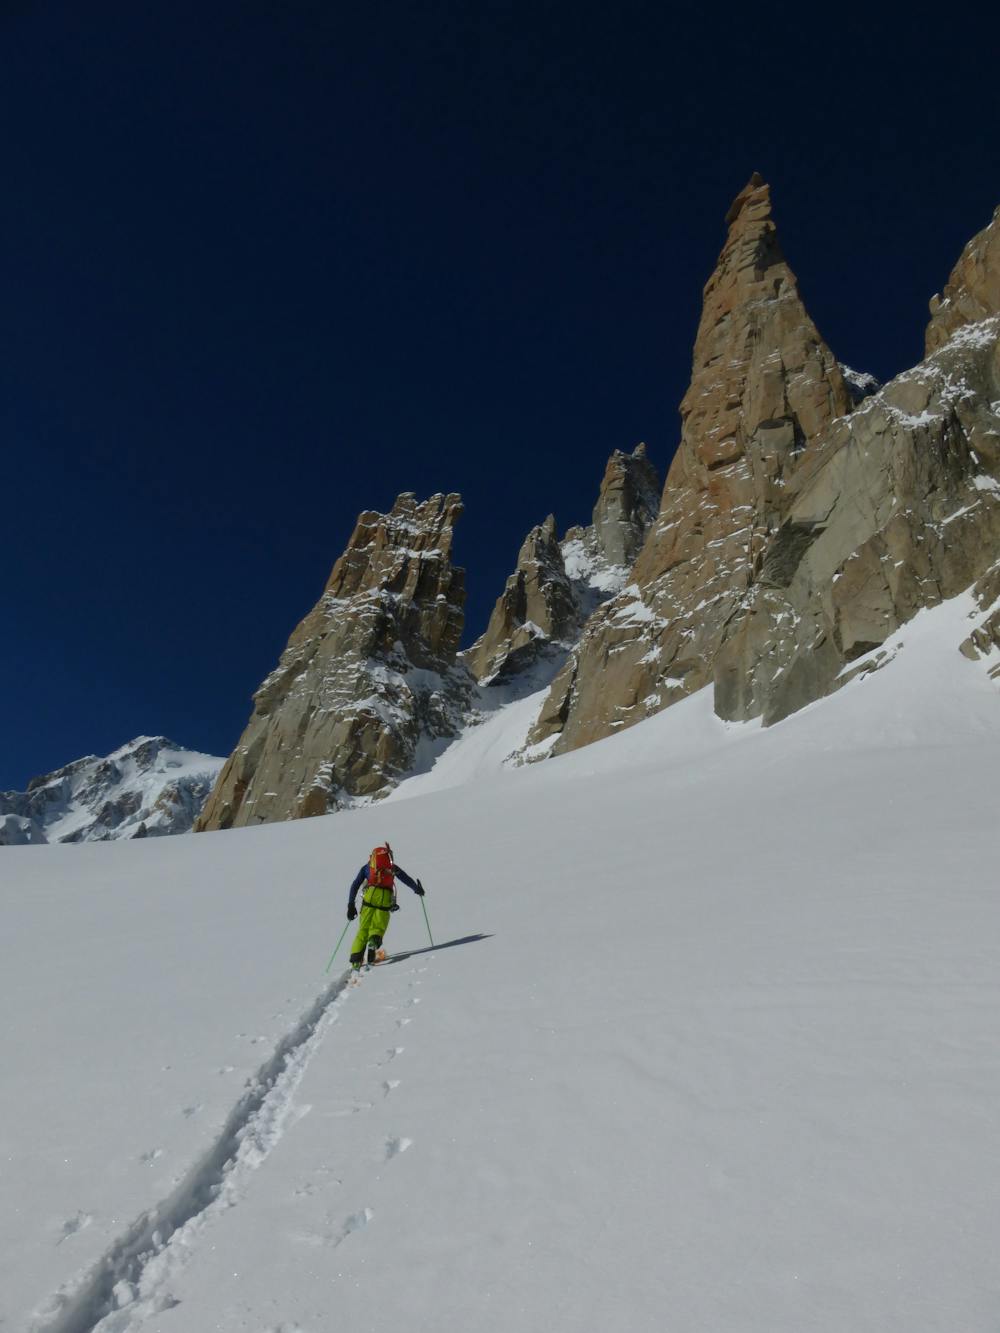 Skinning up towards the start of the approach couloir behind the Grand Capucin